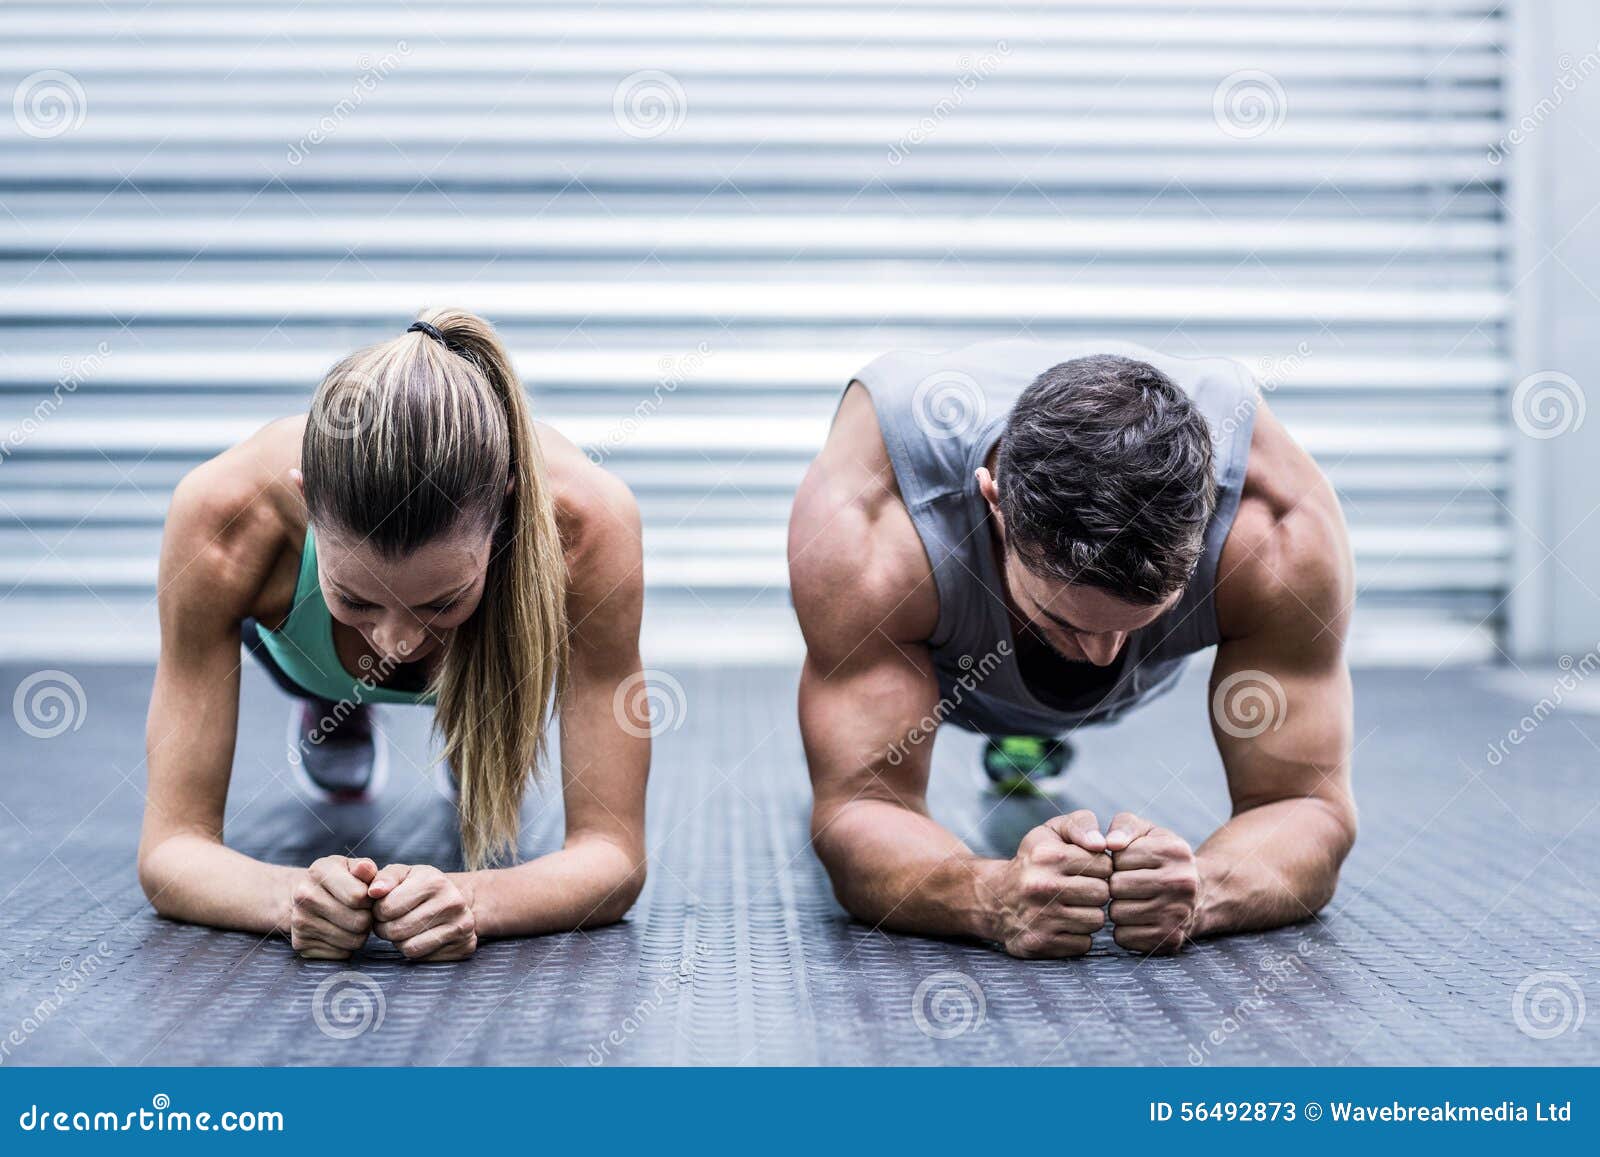 muscular couple doing planking exercises